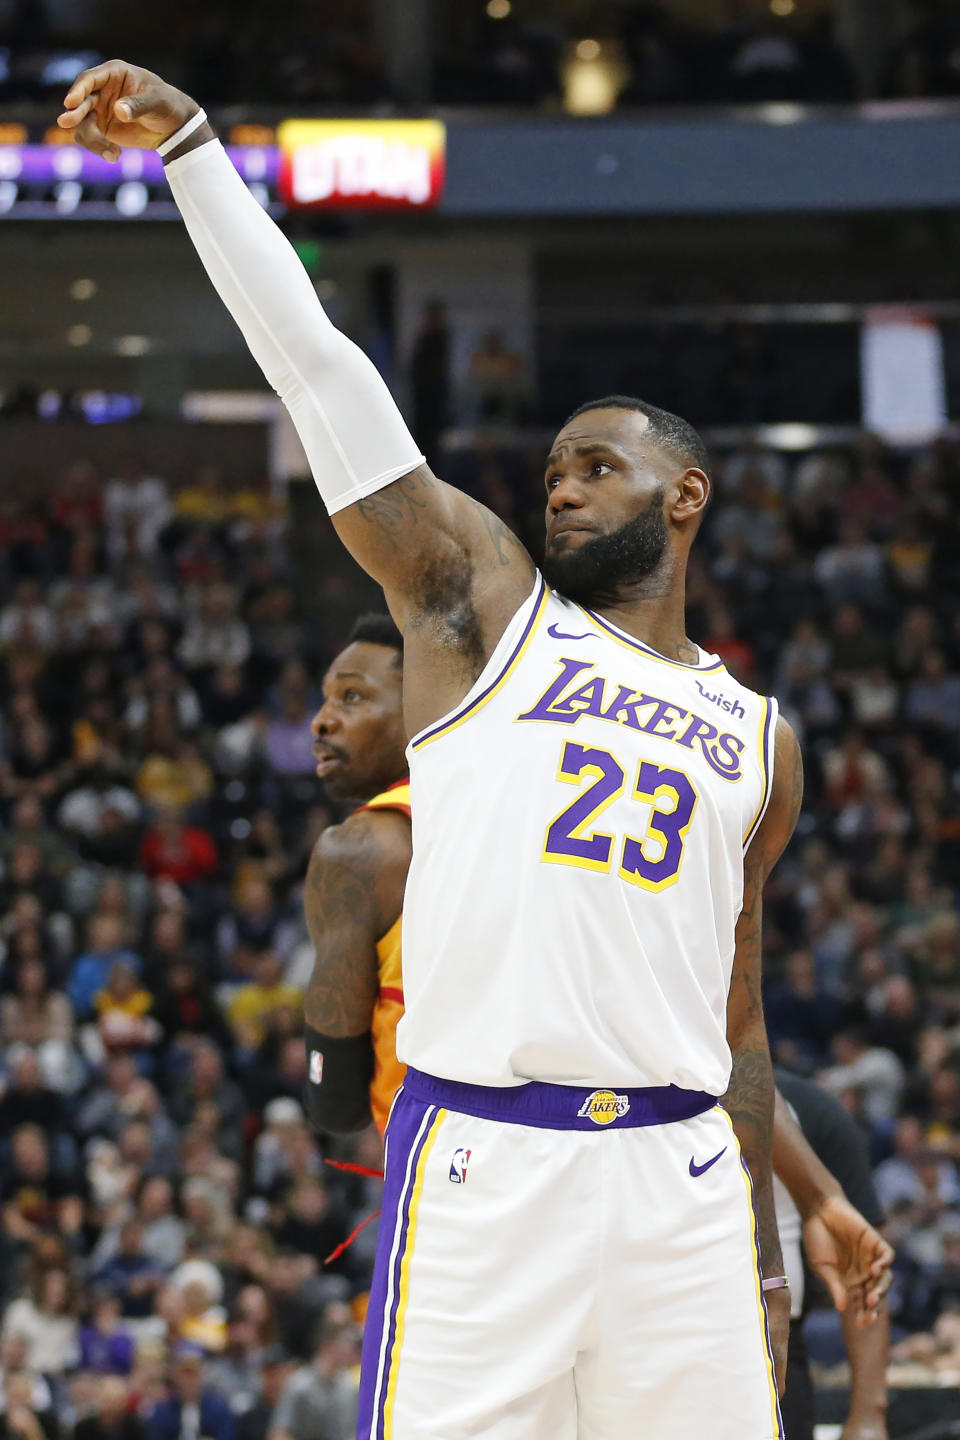 Los Angeles Lakers forward LeBron James (23) follows through after shooting a 3-pointer against Utah Jazz forward Jeff Green, rear, in the first half during an NBA basketball game Wednesday, Dec. 4, 2019, in Salt Lake City. (AP Photo/Rick Bowmer)